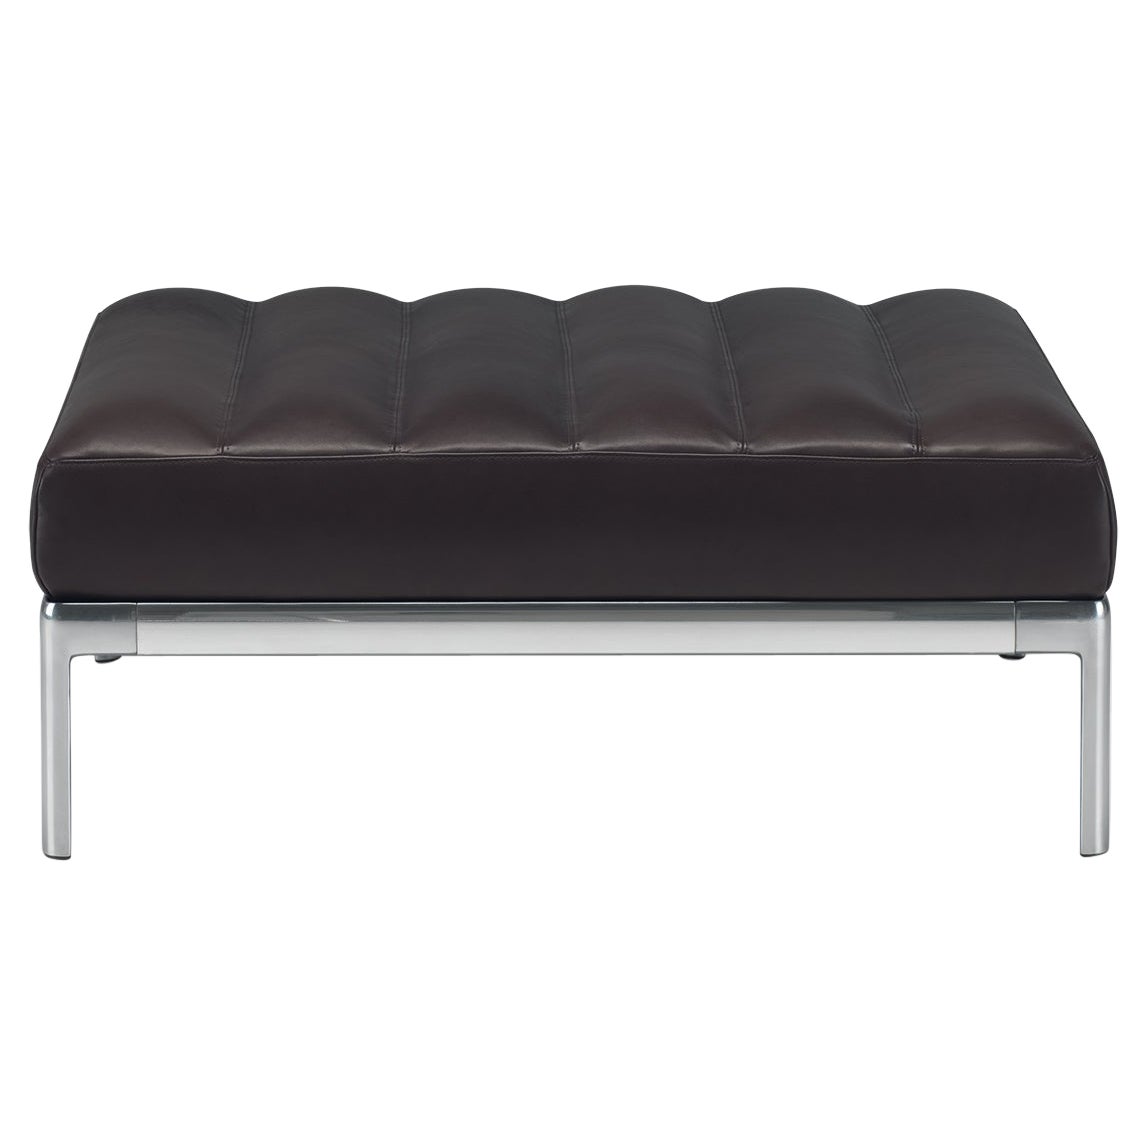 Alias P10 AluZen Pouf 80X95 A in Torba Leather Seat with Polished Aluminum Frame For Sale